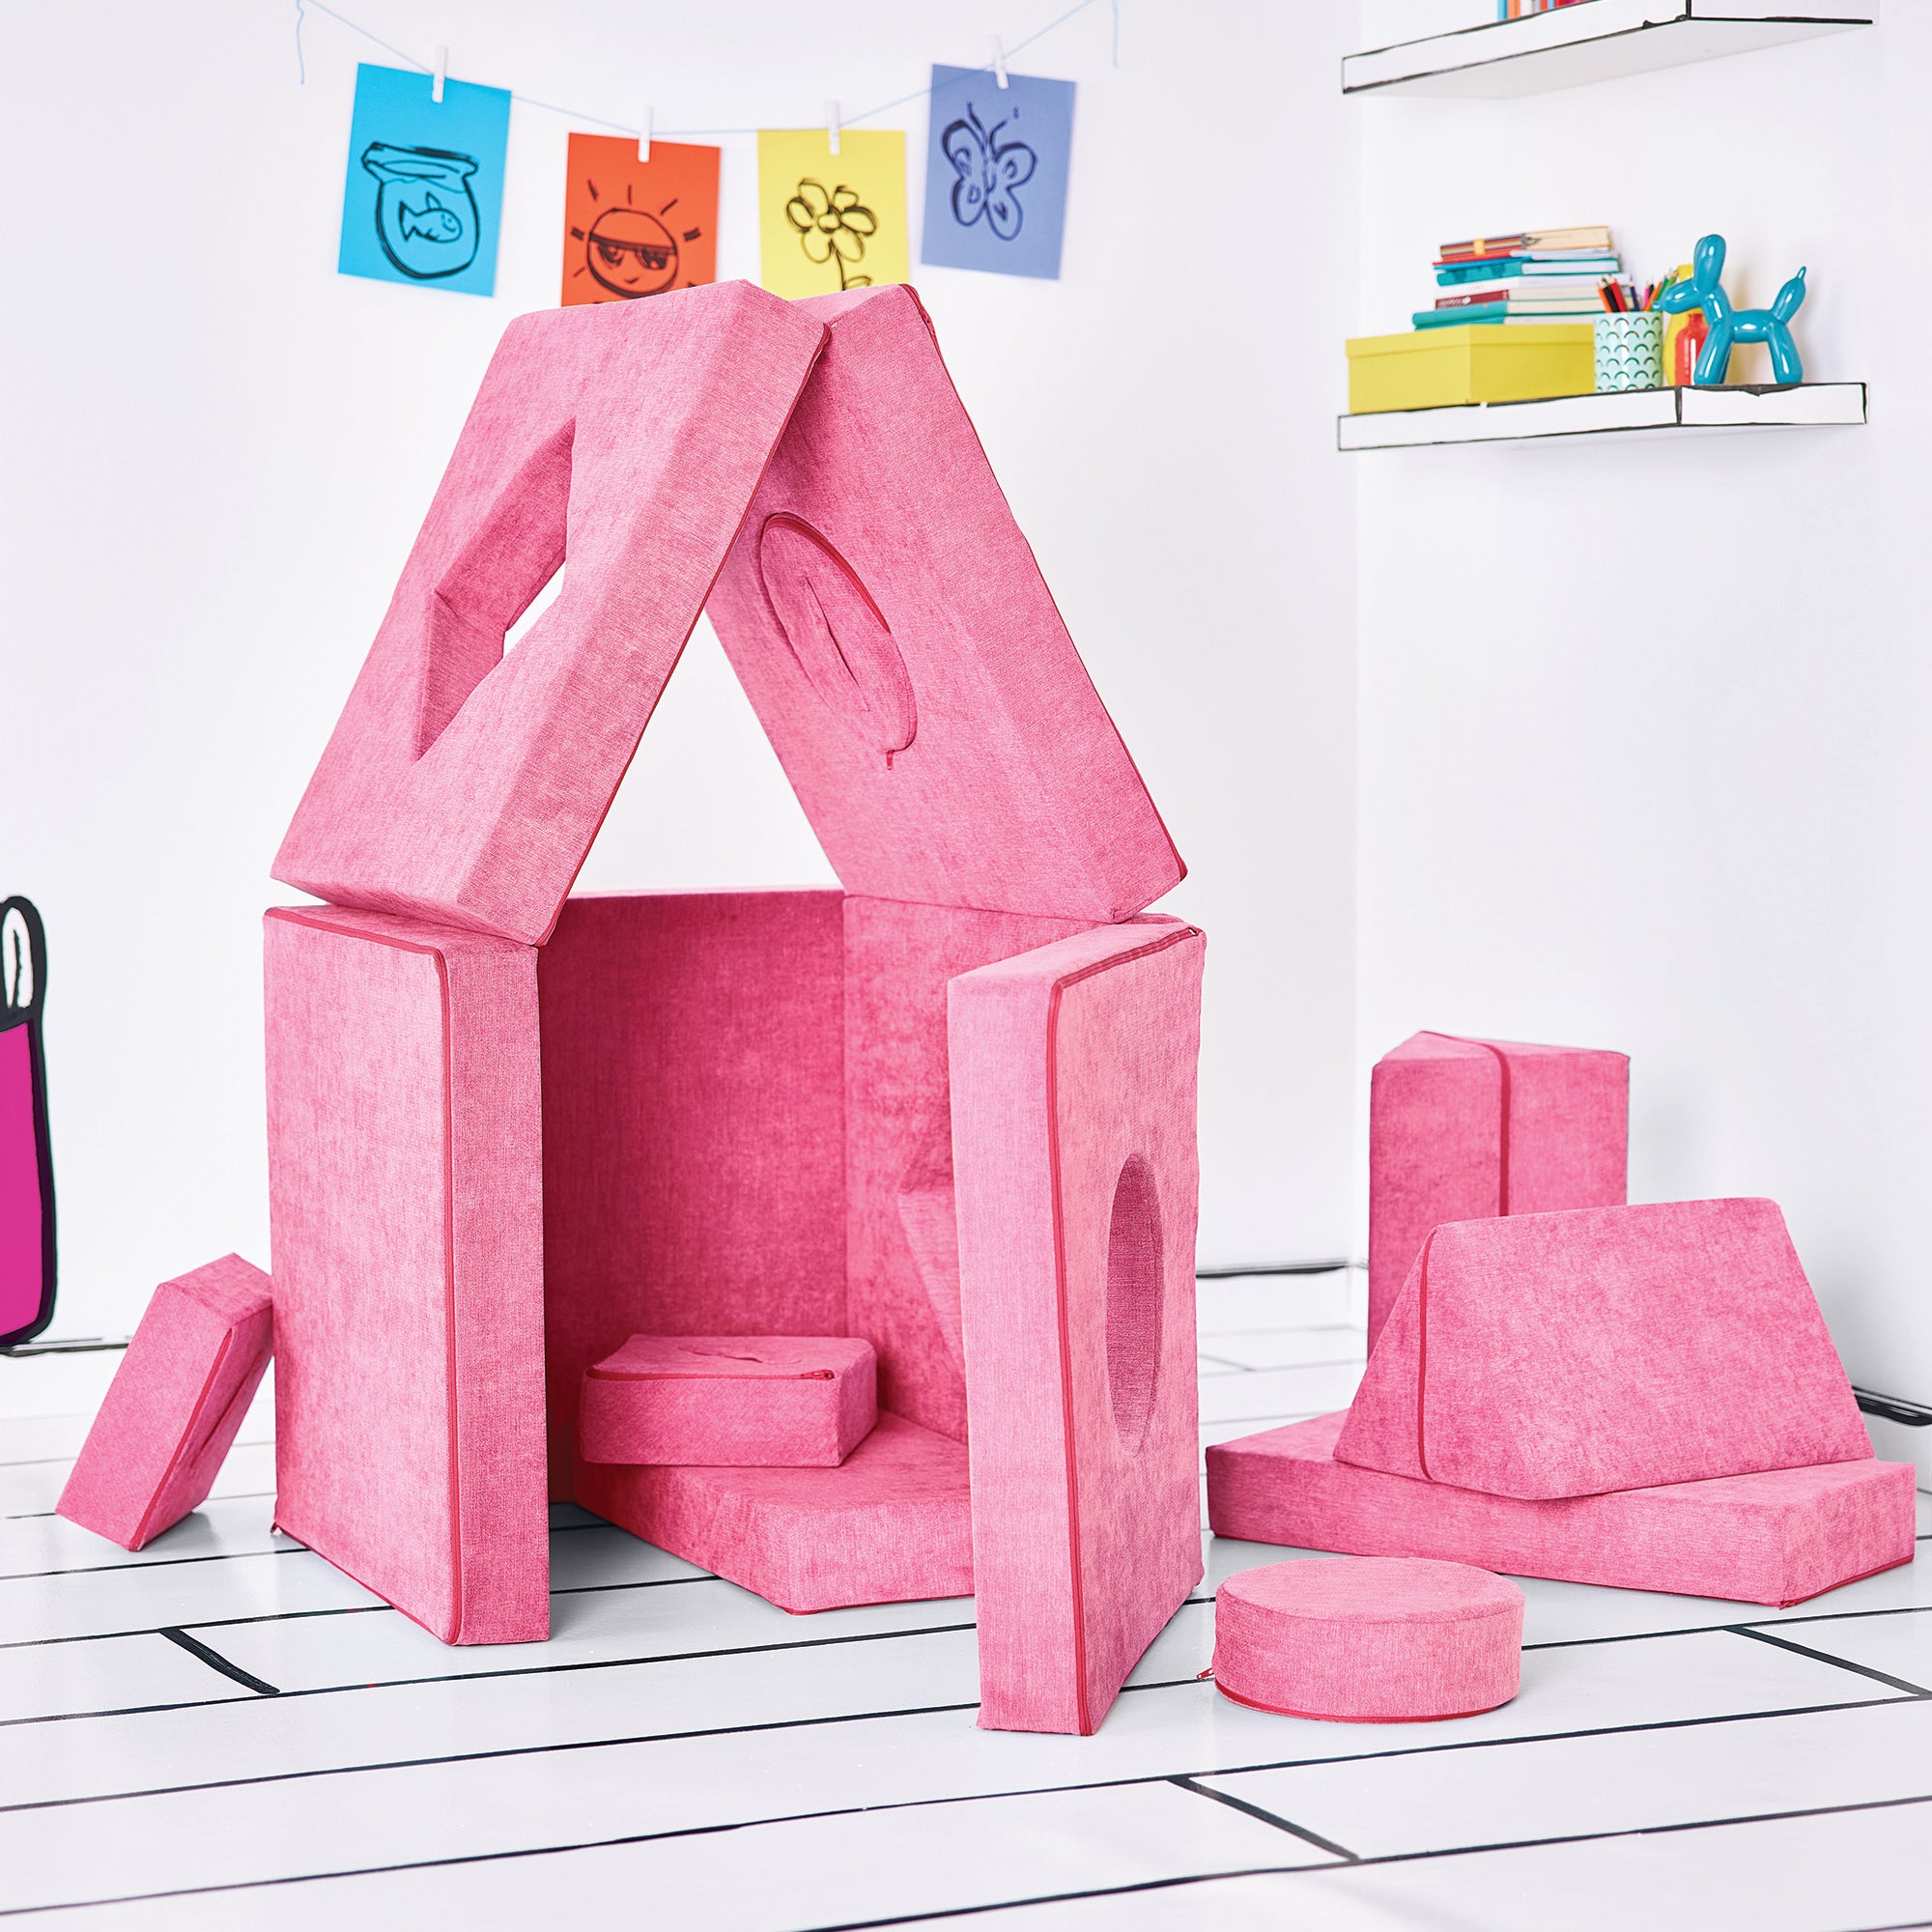 Side-view of the twelve modular pieces of the Yourigami Kids Play Fort in himalayan-pink color formed to create the Home Base configuration